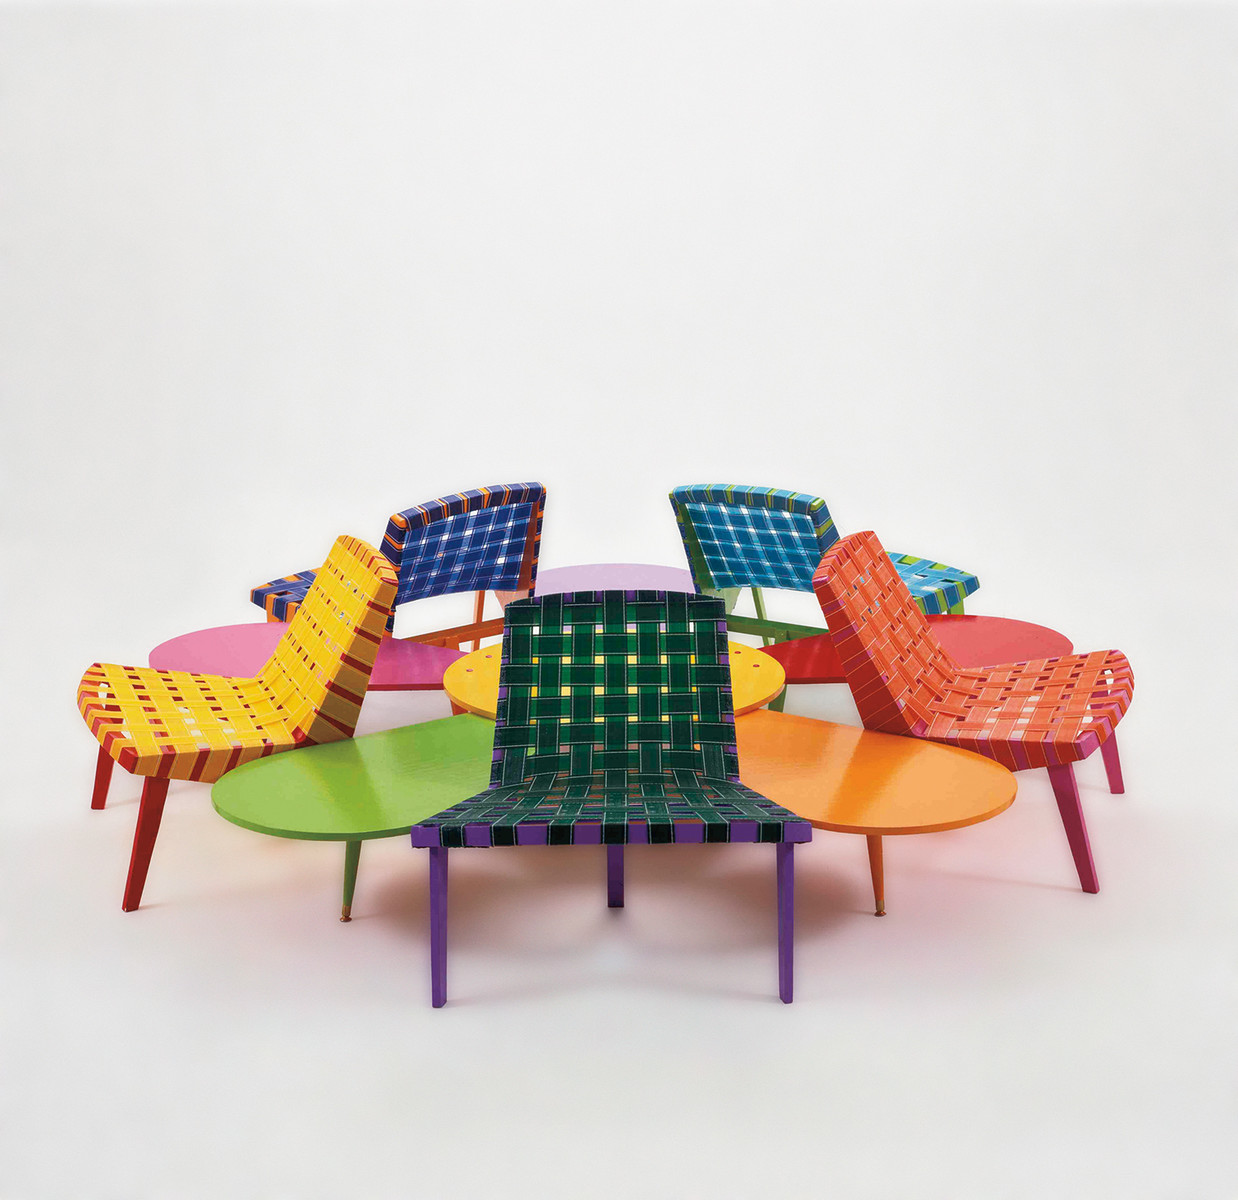 Untitled (Flower Seating Group)